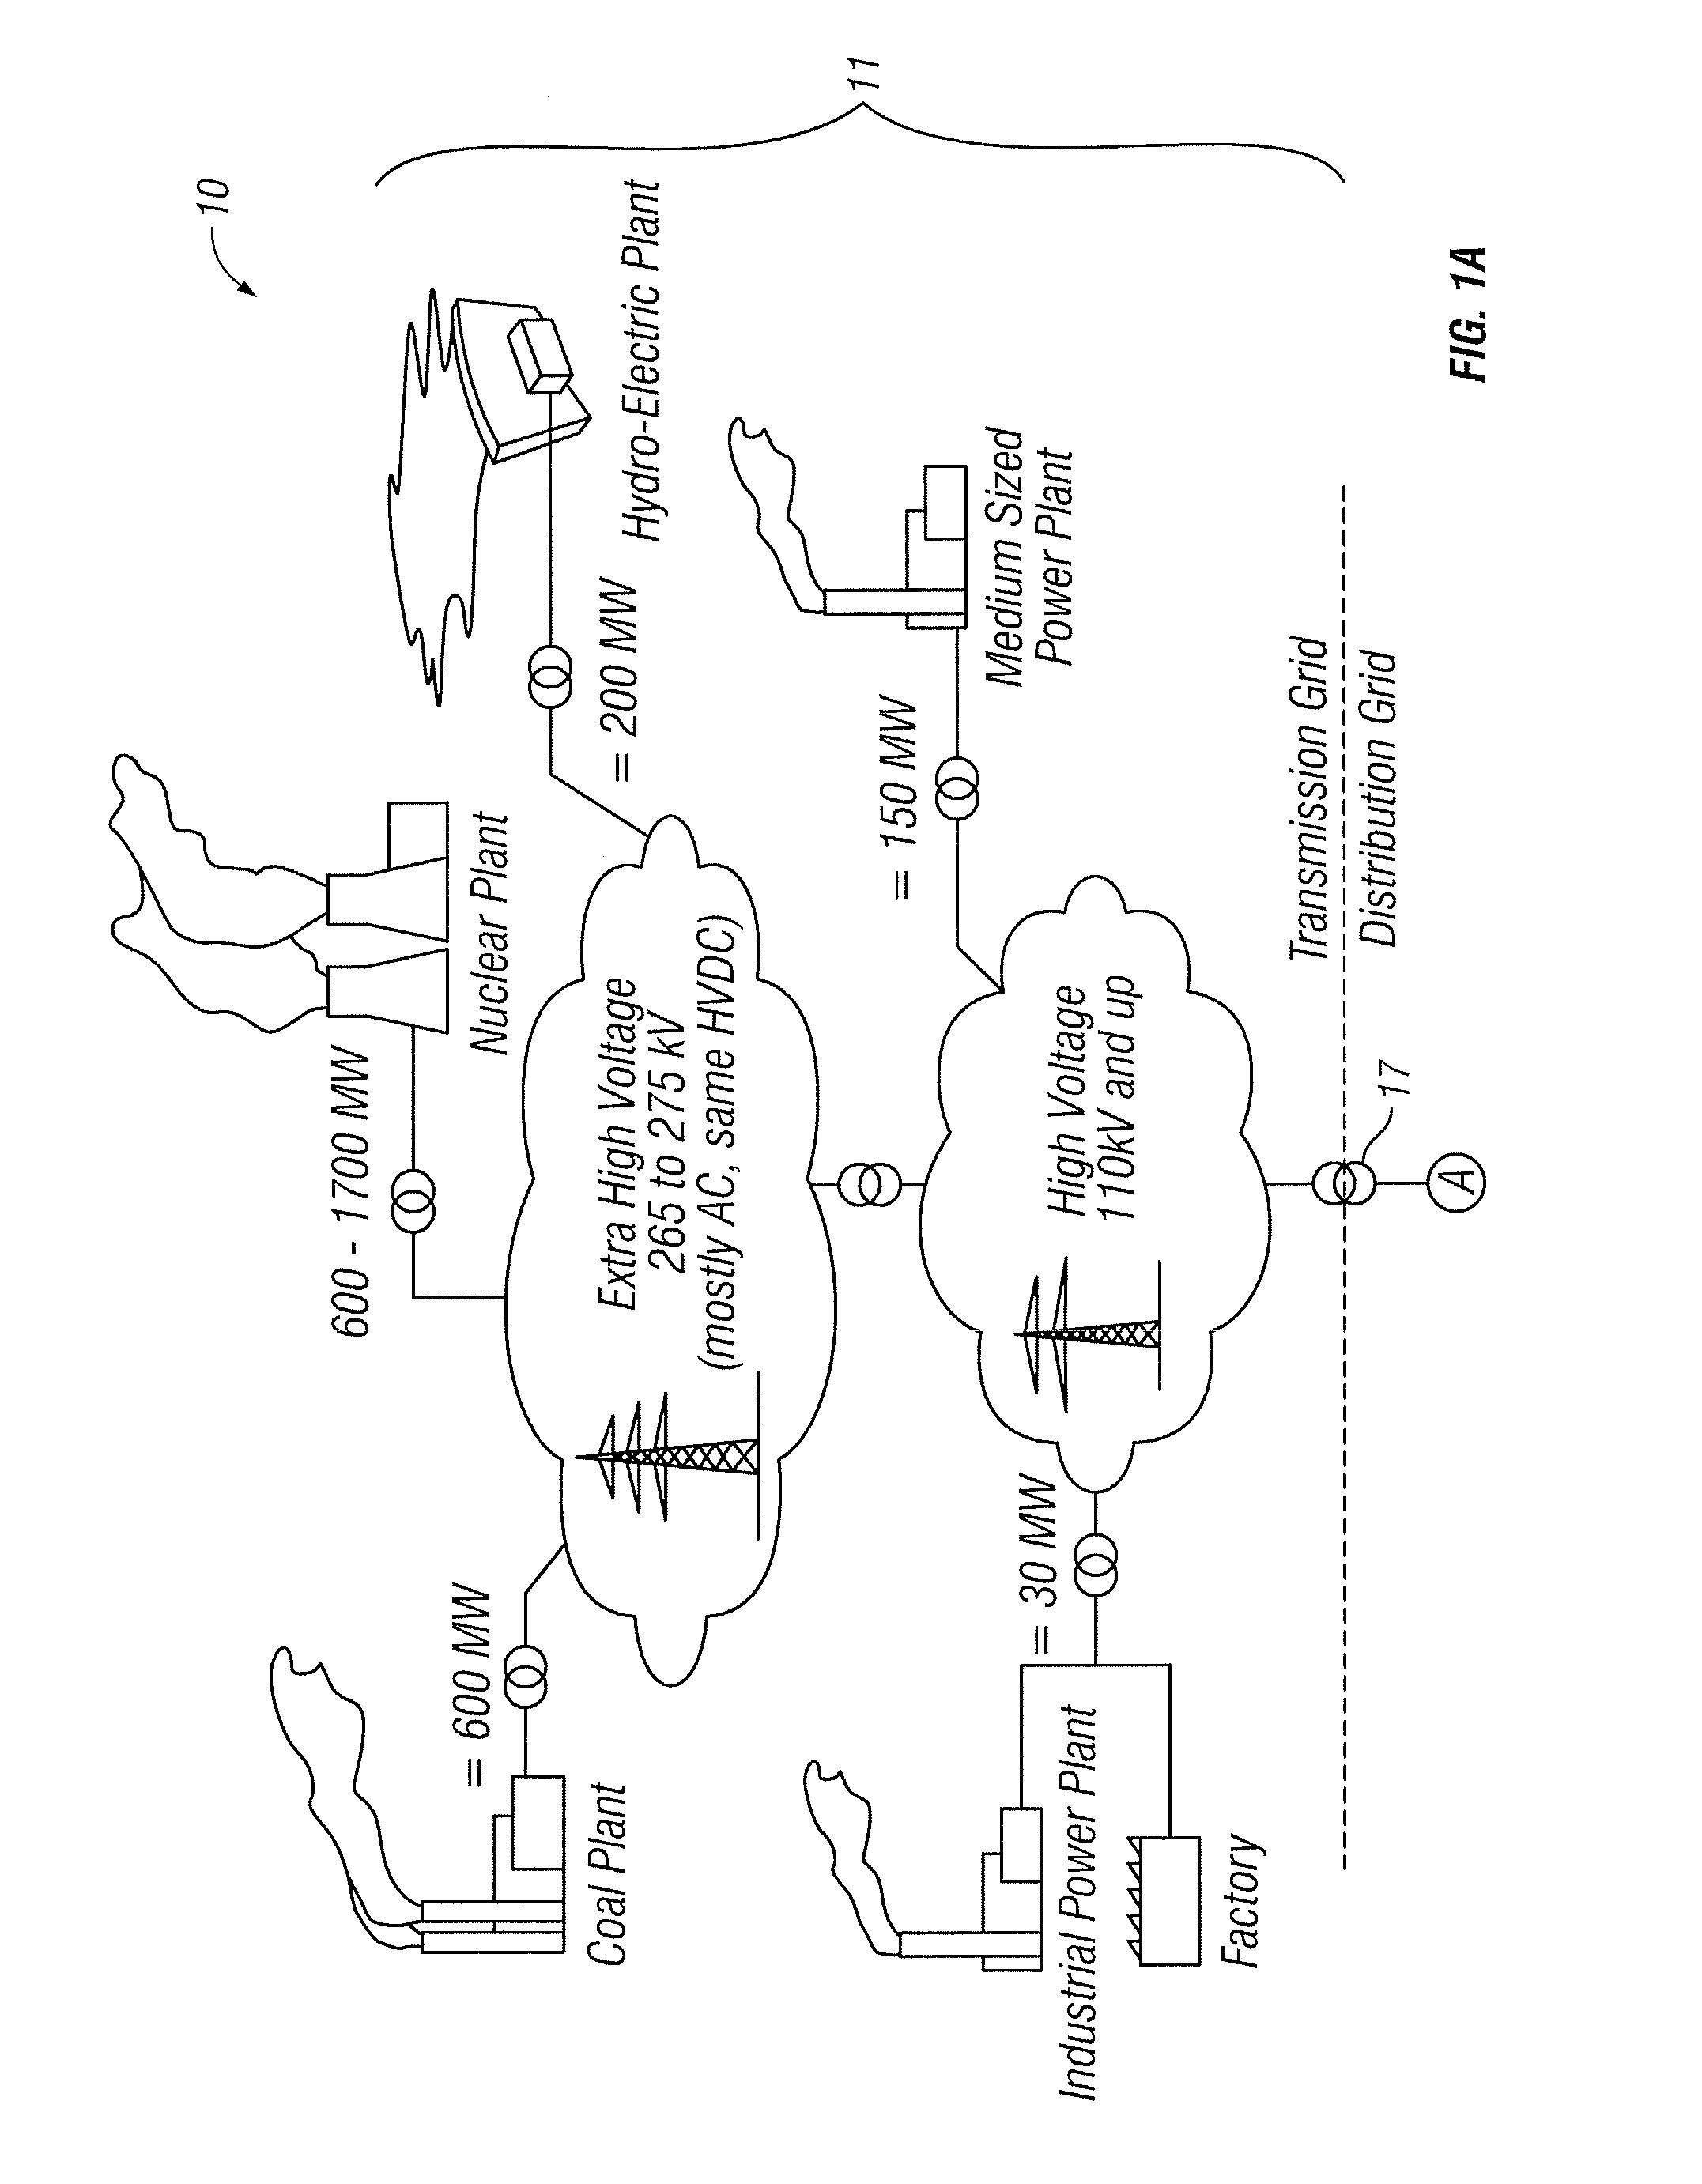 Surge suppression system for medium and high voltage